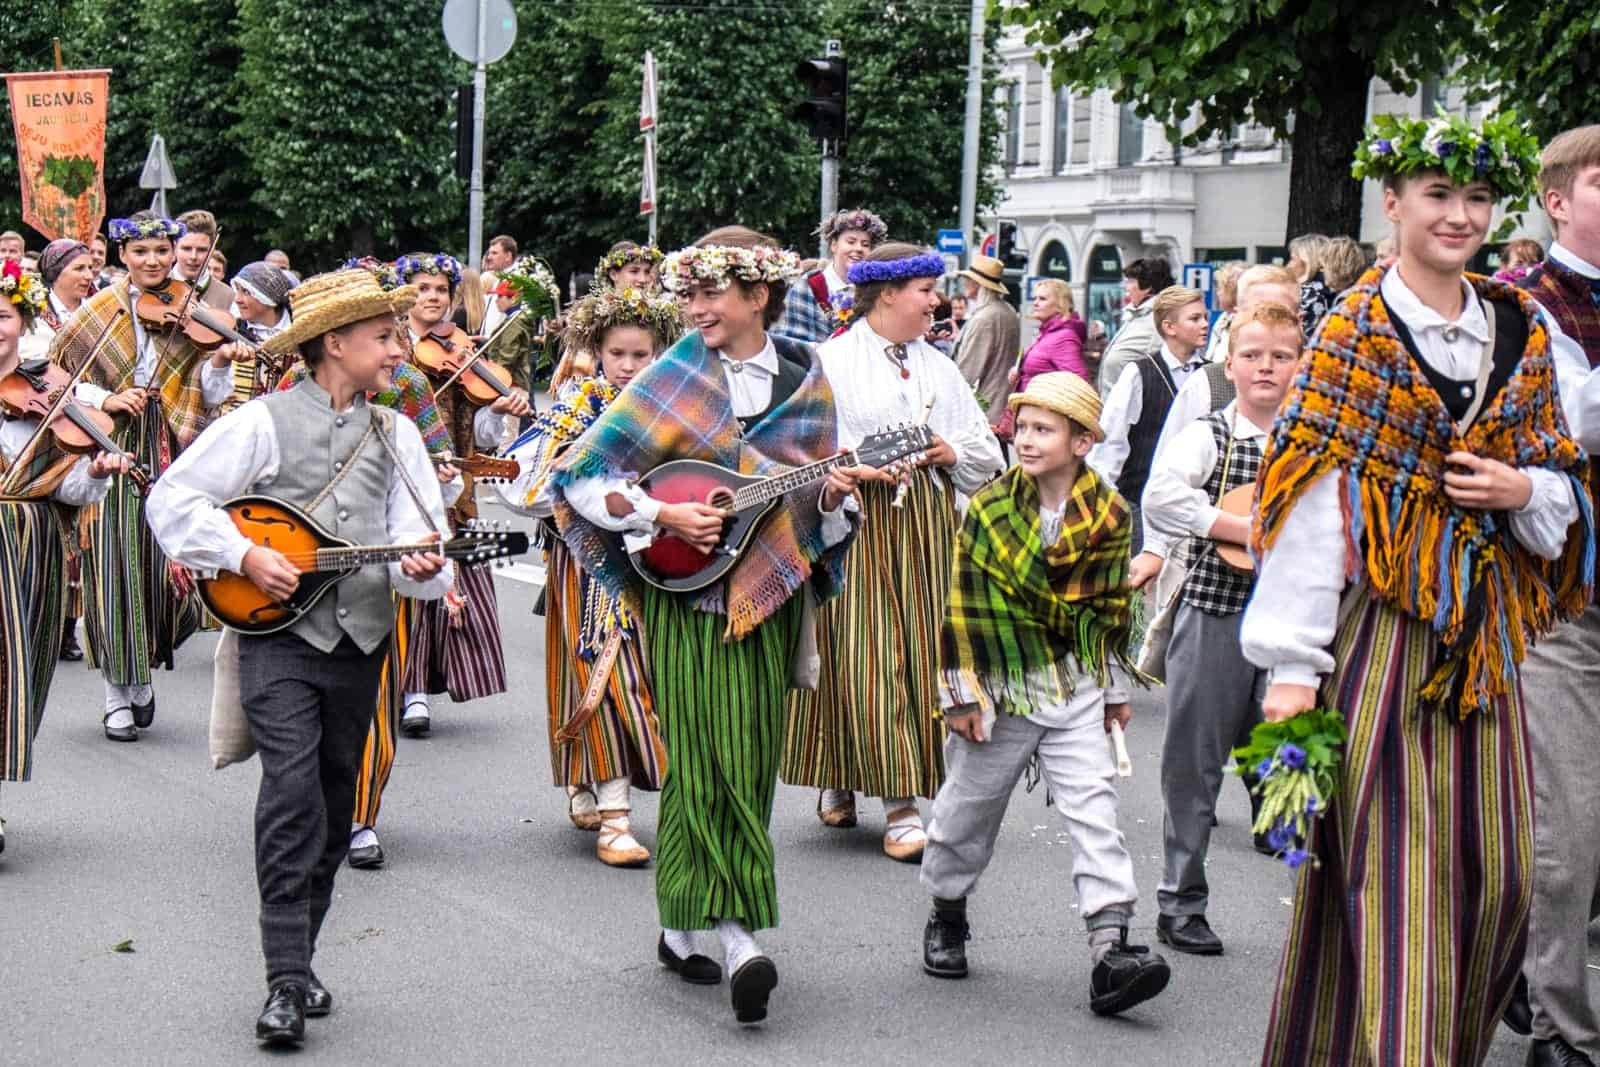 Children perform songs in the street at the Song and Dance Celebration in Latvia